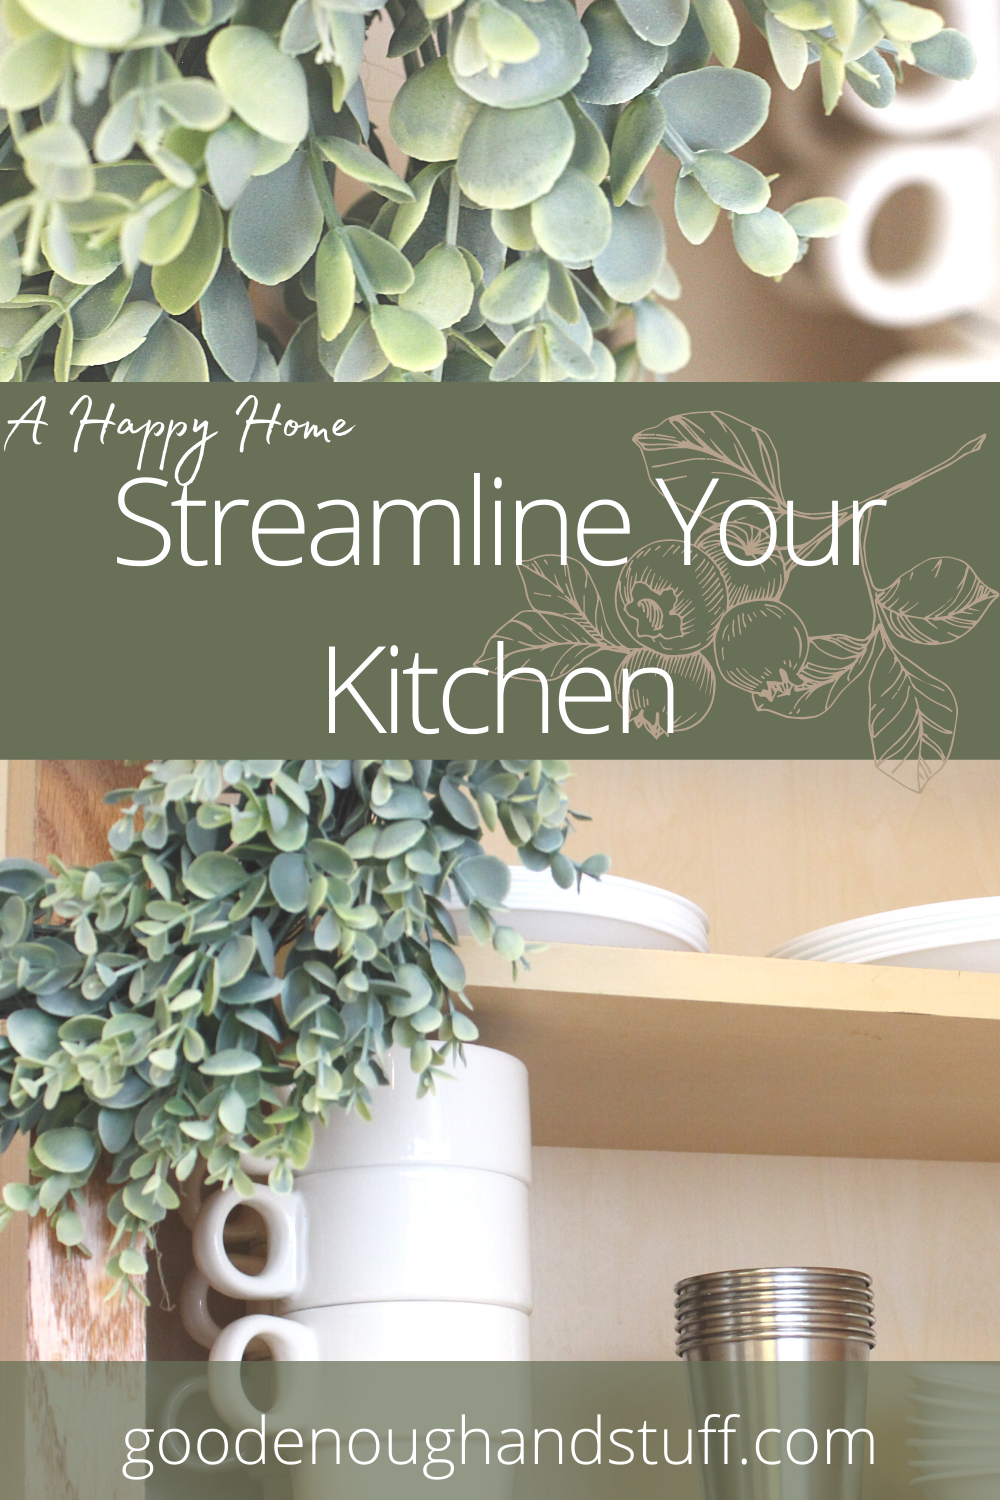 white and metal dishes in a cupboard with greenery and the words "streamline your kitchen"